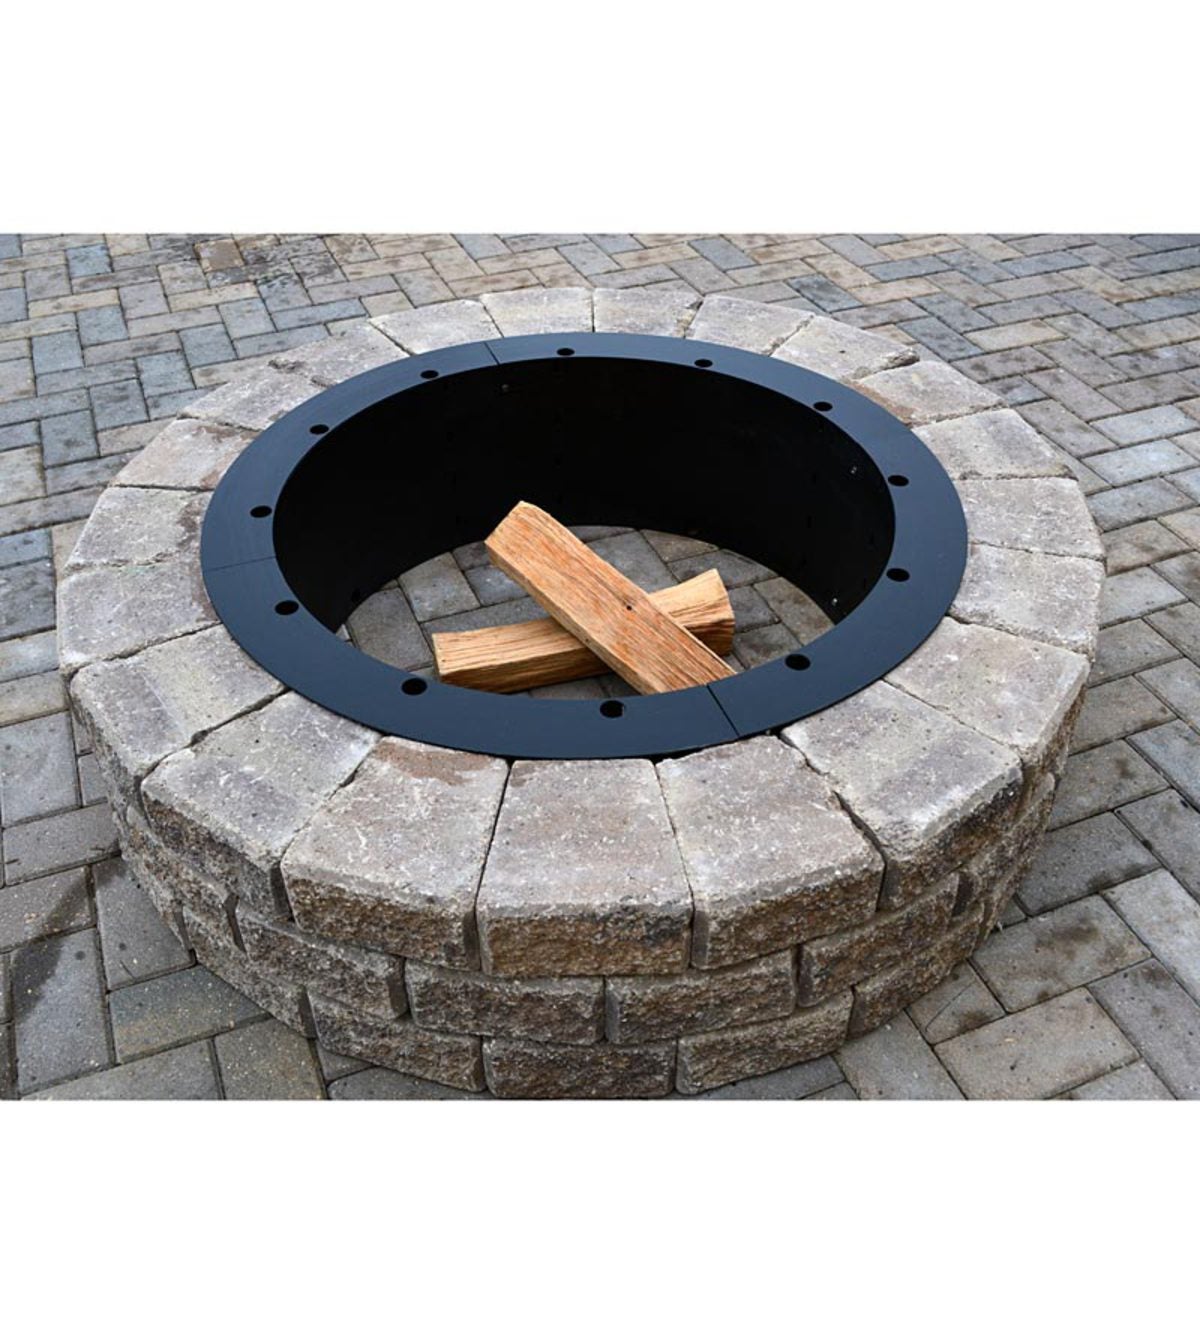 American-Made 36”Round Fire Pit Insert | PlowHearth